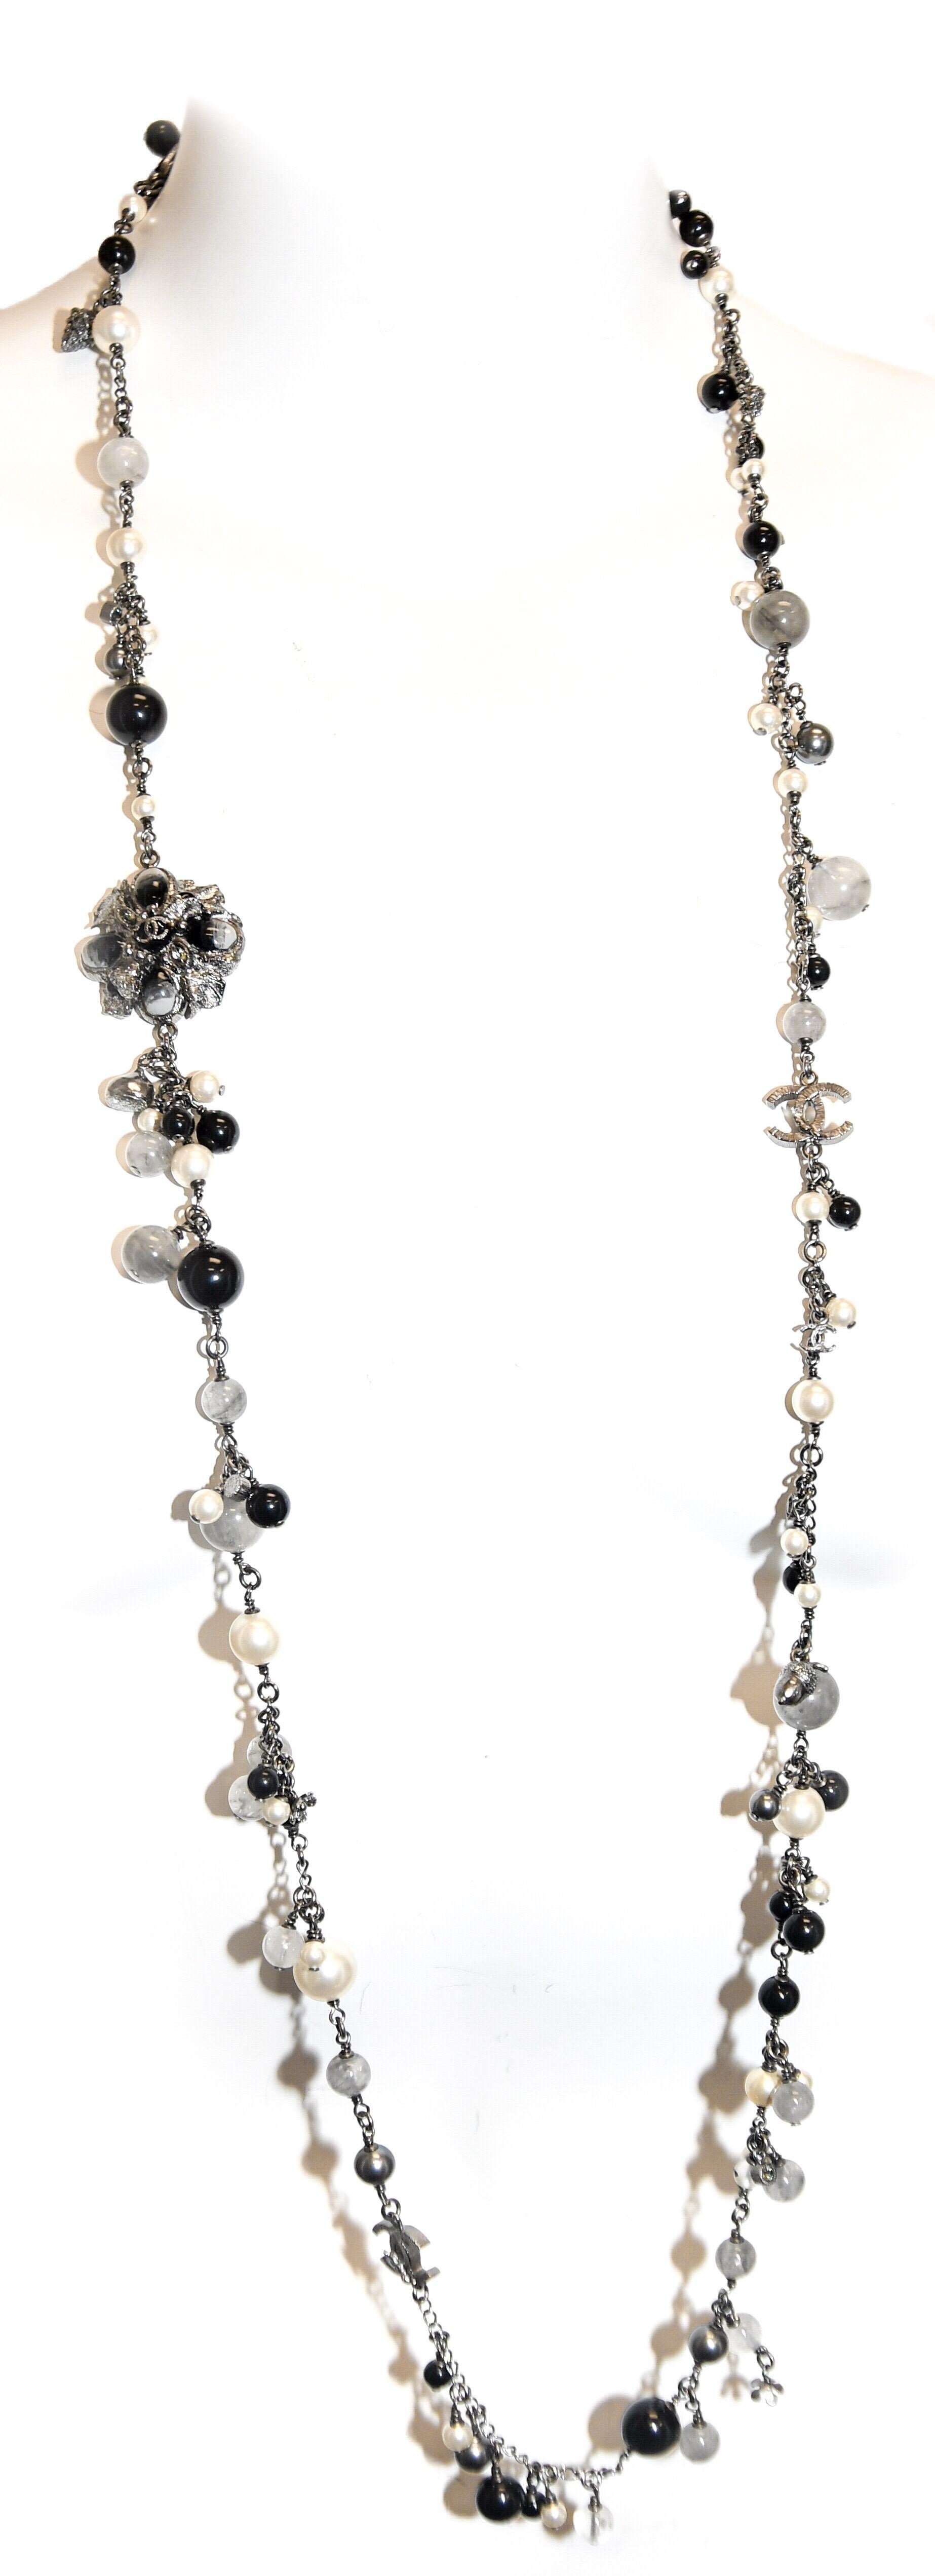 Instantly recognizable as an iconic Chanel necklace!  Pearls,  Onyx, Hematite and rutlilated quartz beads are only the beginning!
Ever familiar Camellia is adorned on each side with CC logo.  Bezel set crystals, acorns, CC logos and tiny flower